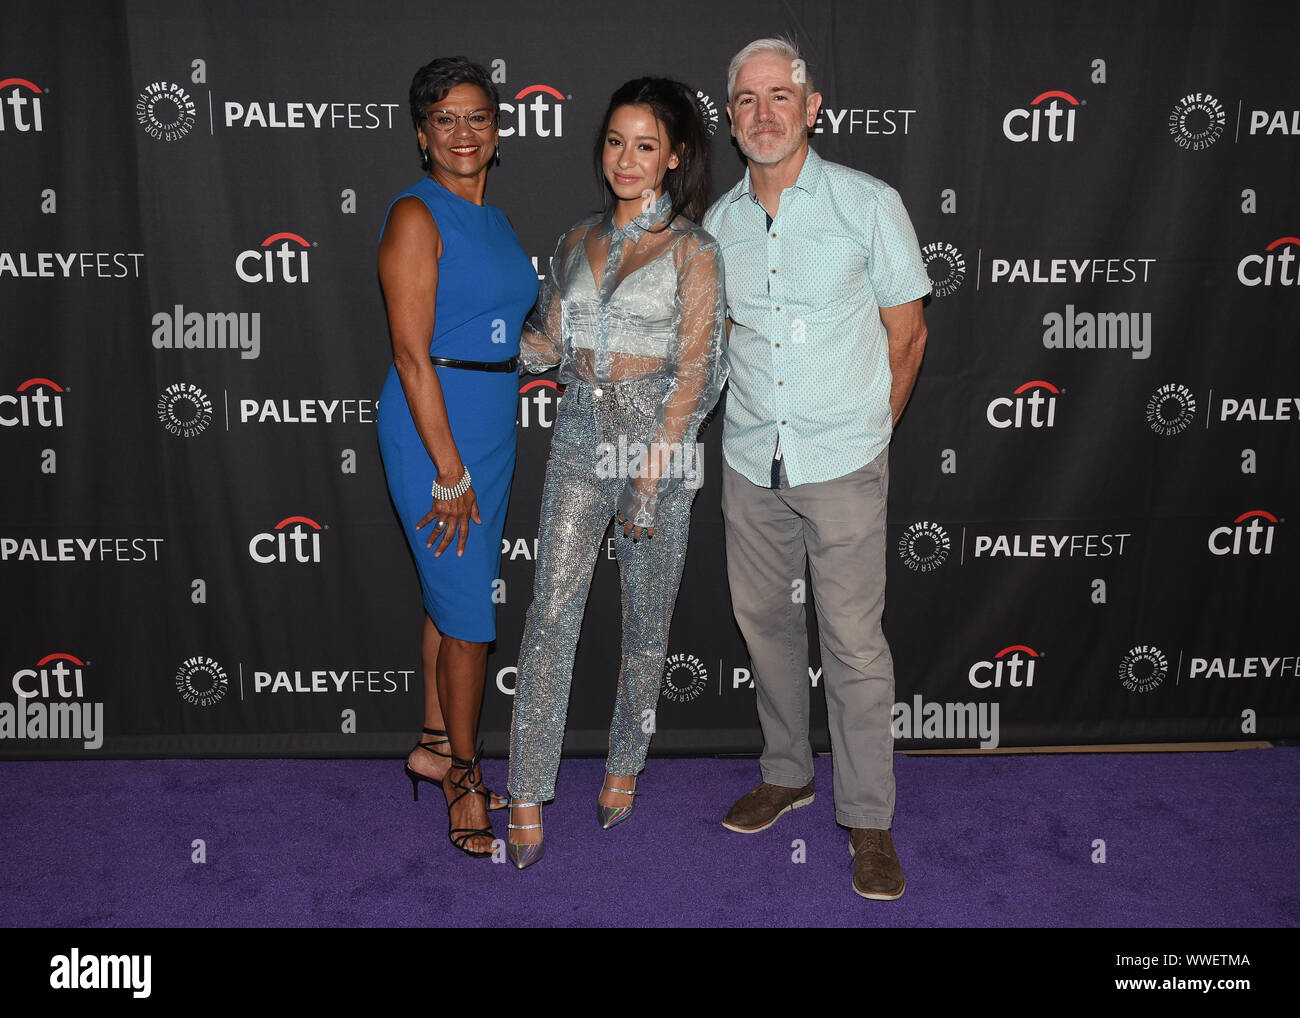 September 15, 2019, Beverly Hills, California, USA: (L-R) Sonia Manzano, Izabella Alvarez and Carlos Alazraqui of  ''The Casagrandes'' The Paley Center For Media's 13th Annual PaleyFest Fall TV Previews - TBS. (Credit Image: © Billy Bennight/ZUMA Wire) Stock Photo